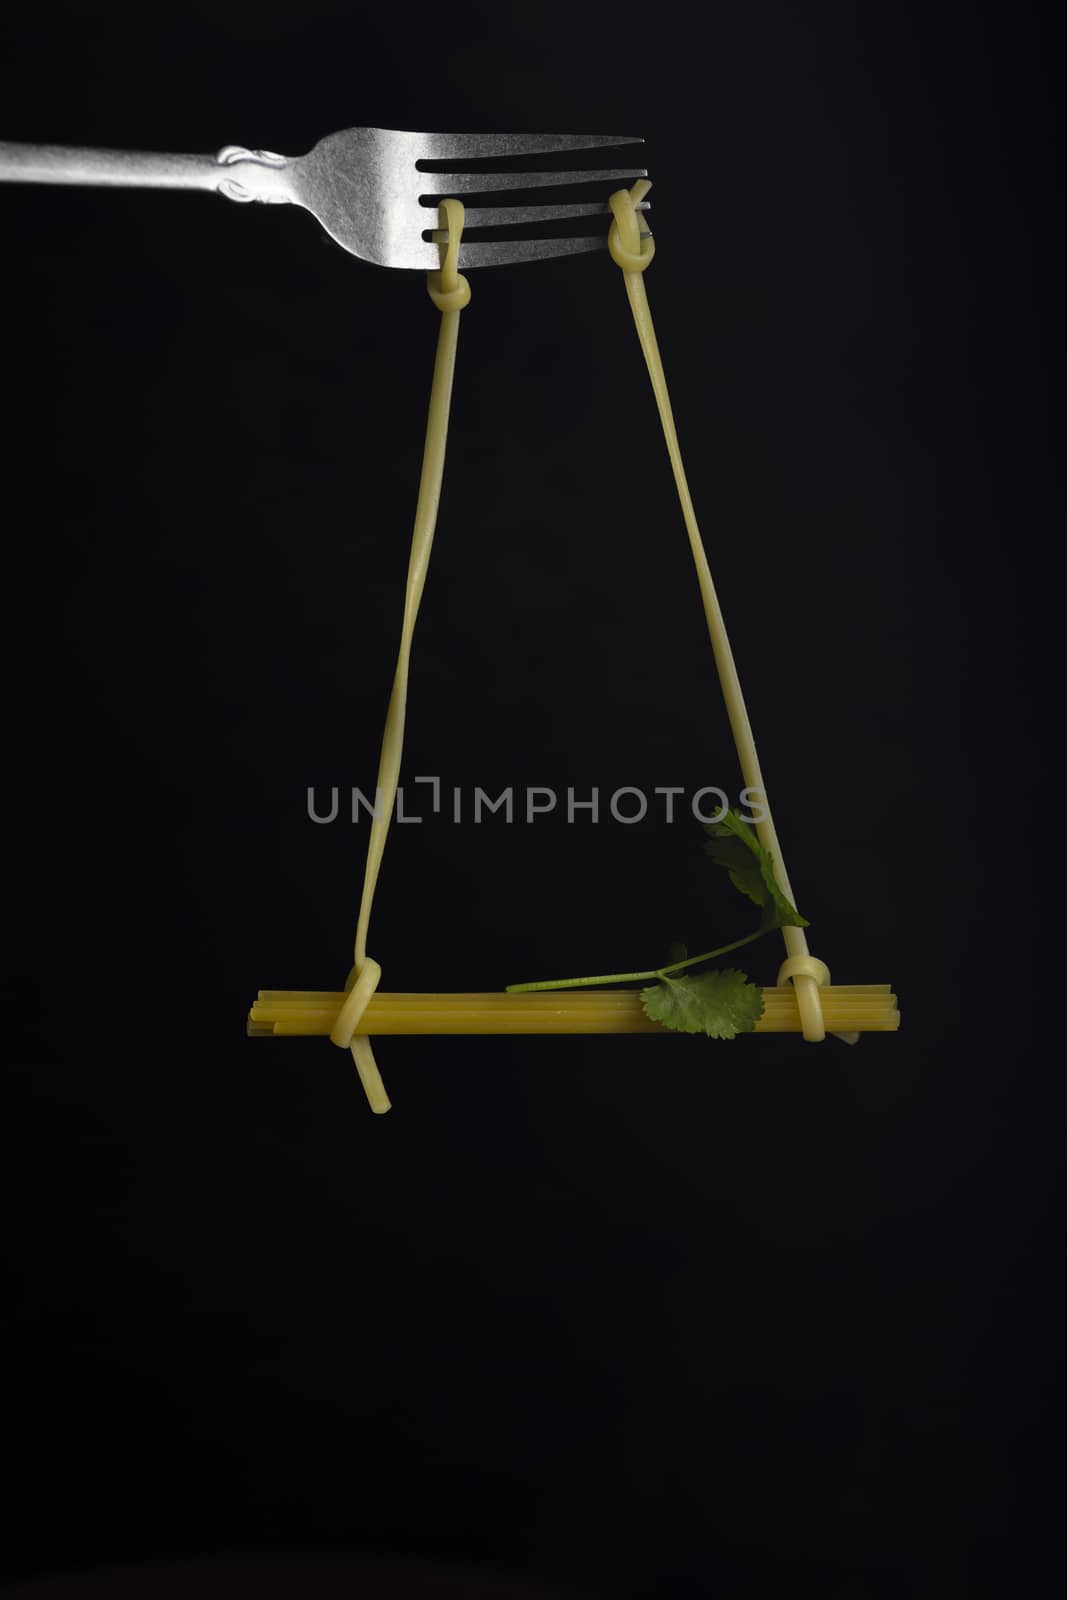 Spaghetti on a fork in front of black background. Swing from spaghetti by sashokddt